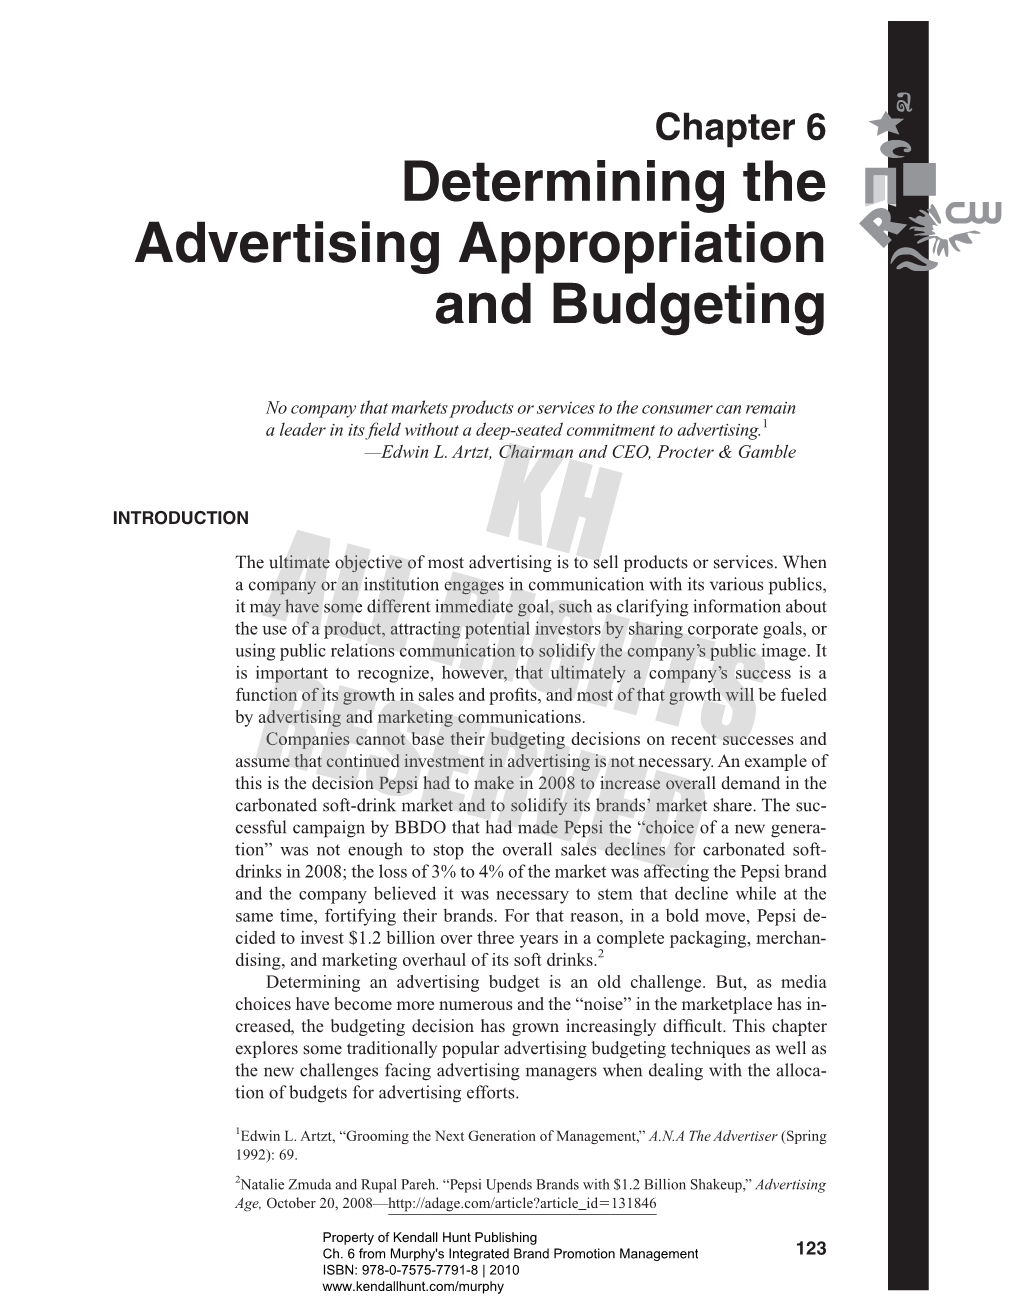 Determining the Advertising Appropriation and Budgeting